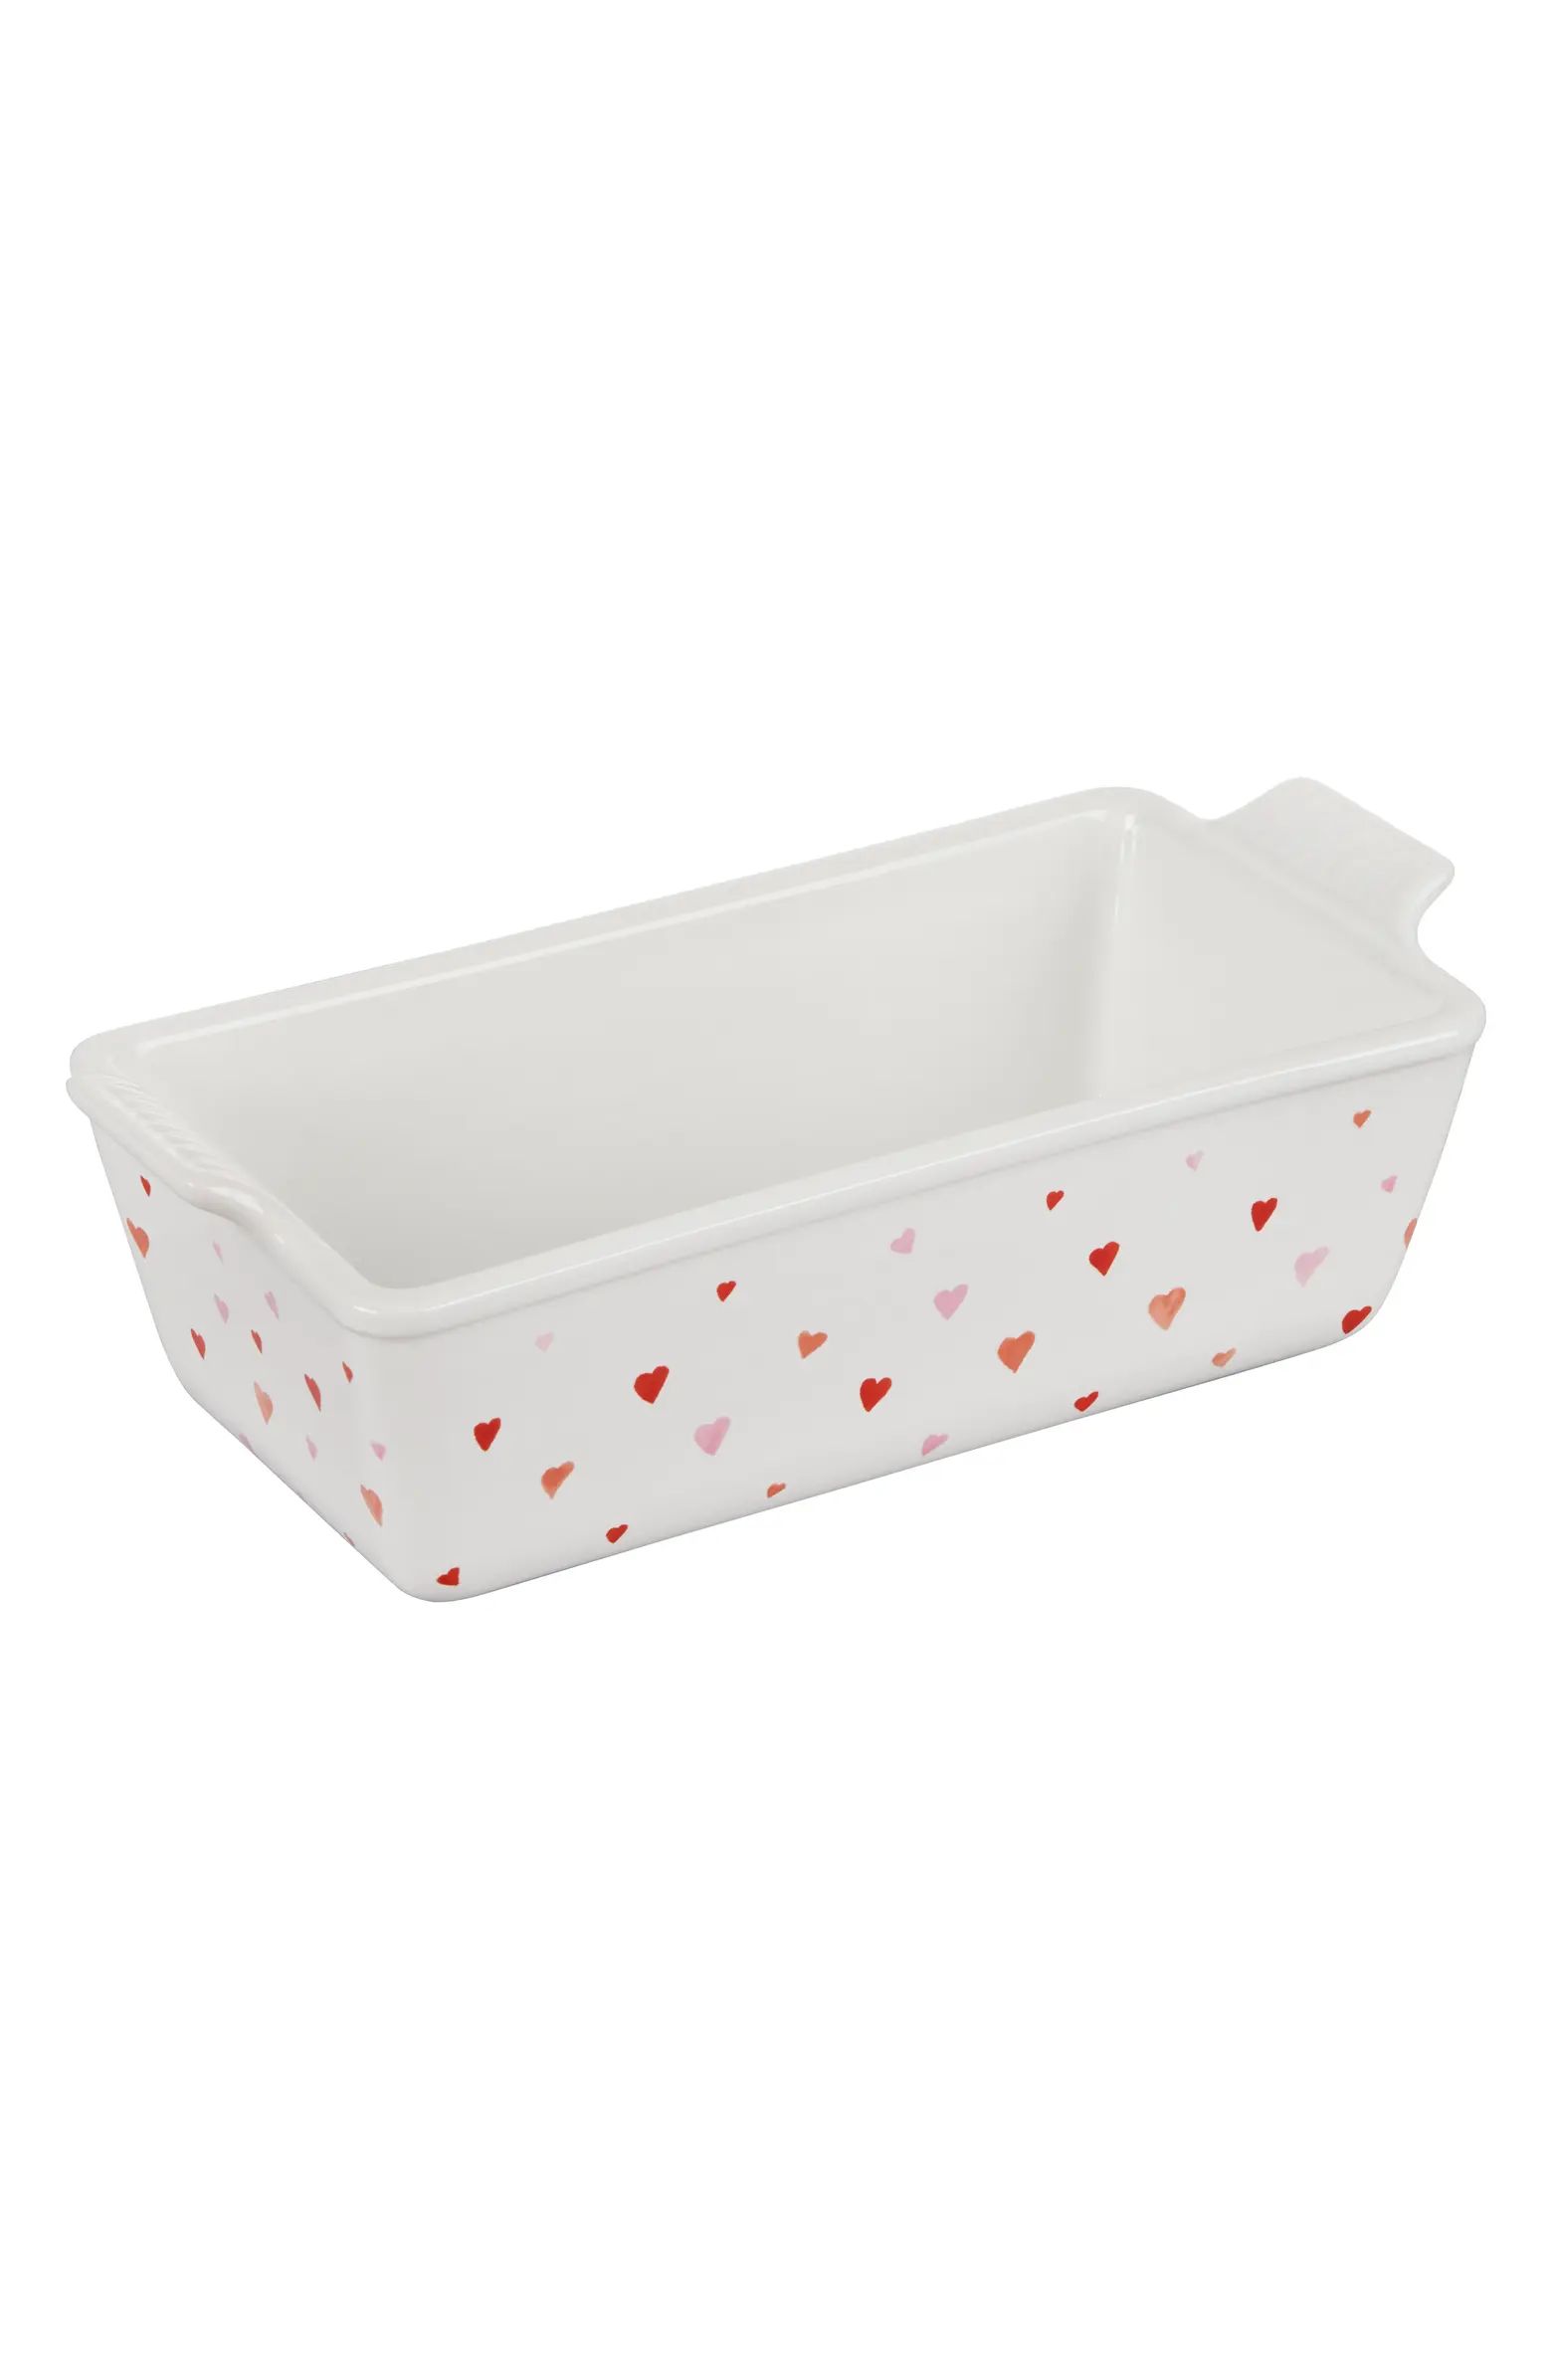 L'Amour Collection Loaf Pan | Nordstrom